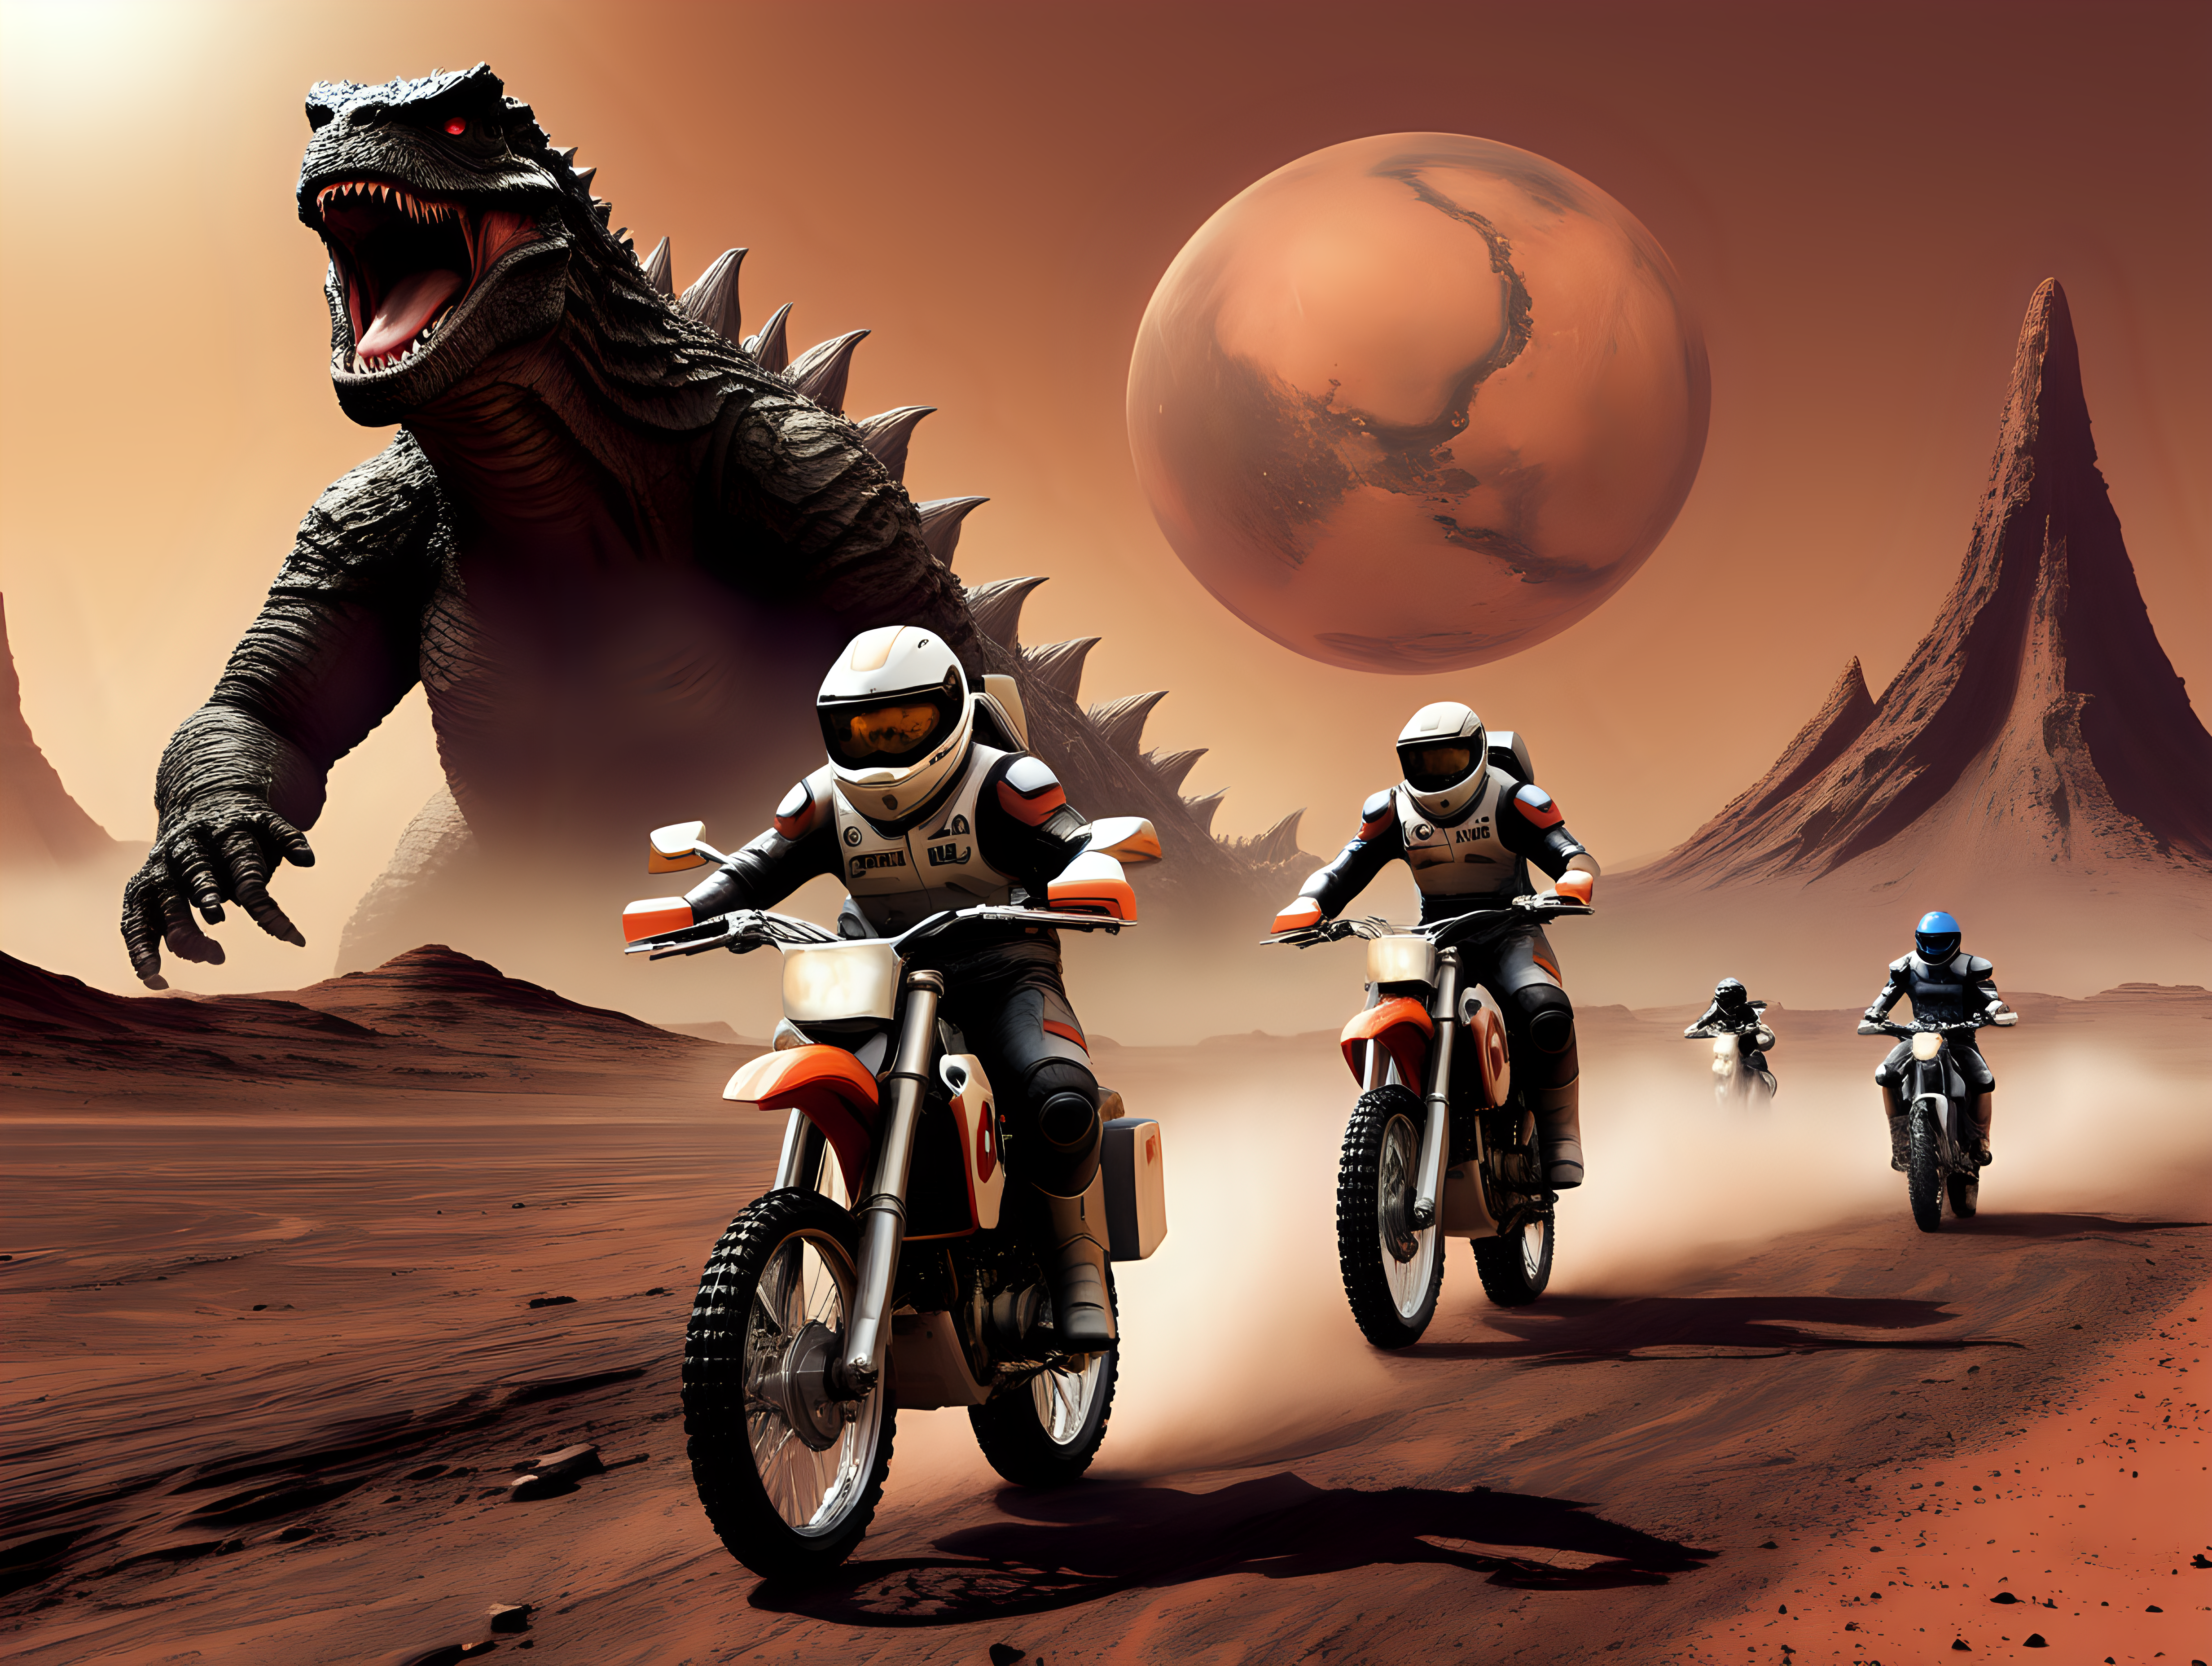 Motorcycles race on Mars chased by Godzilla